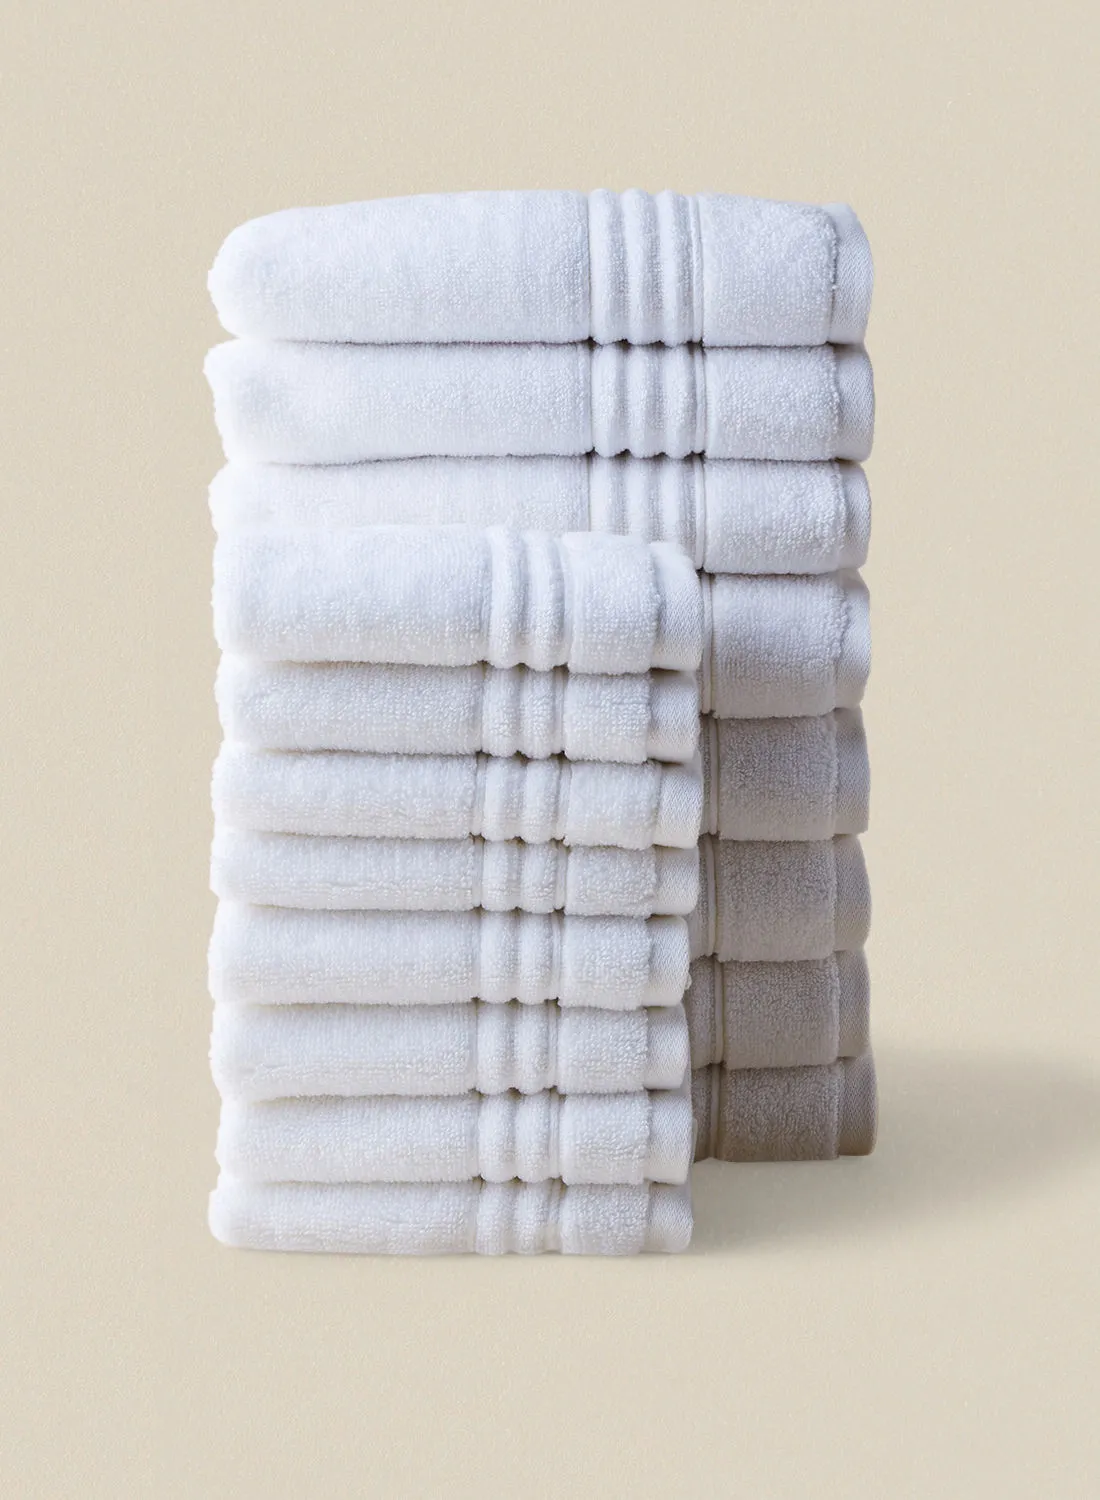 noon east 16 Piece Bathroom Towel Set - 500 GSM 100% Cotton - 8 Hand Towel - 8 Face Towel - White Color - Highly Absorbent - Fast Dry